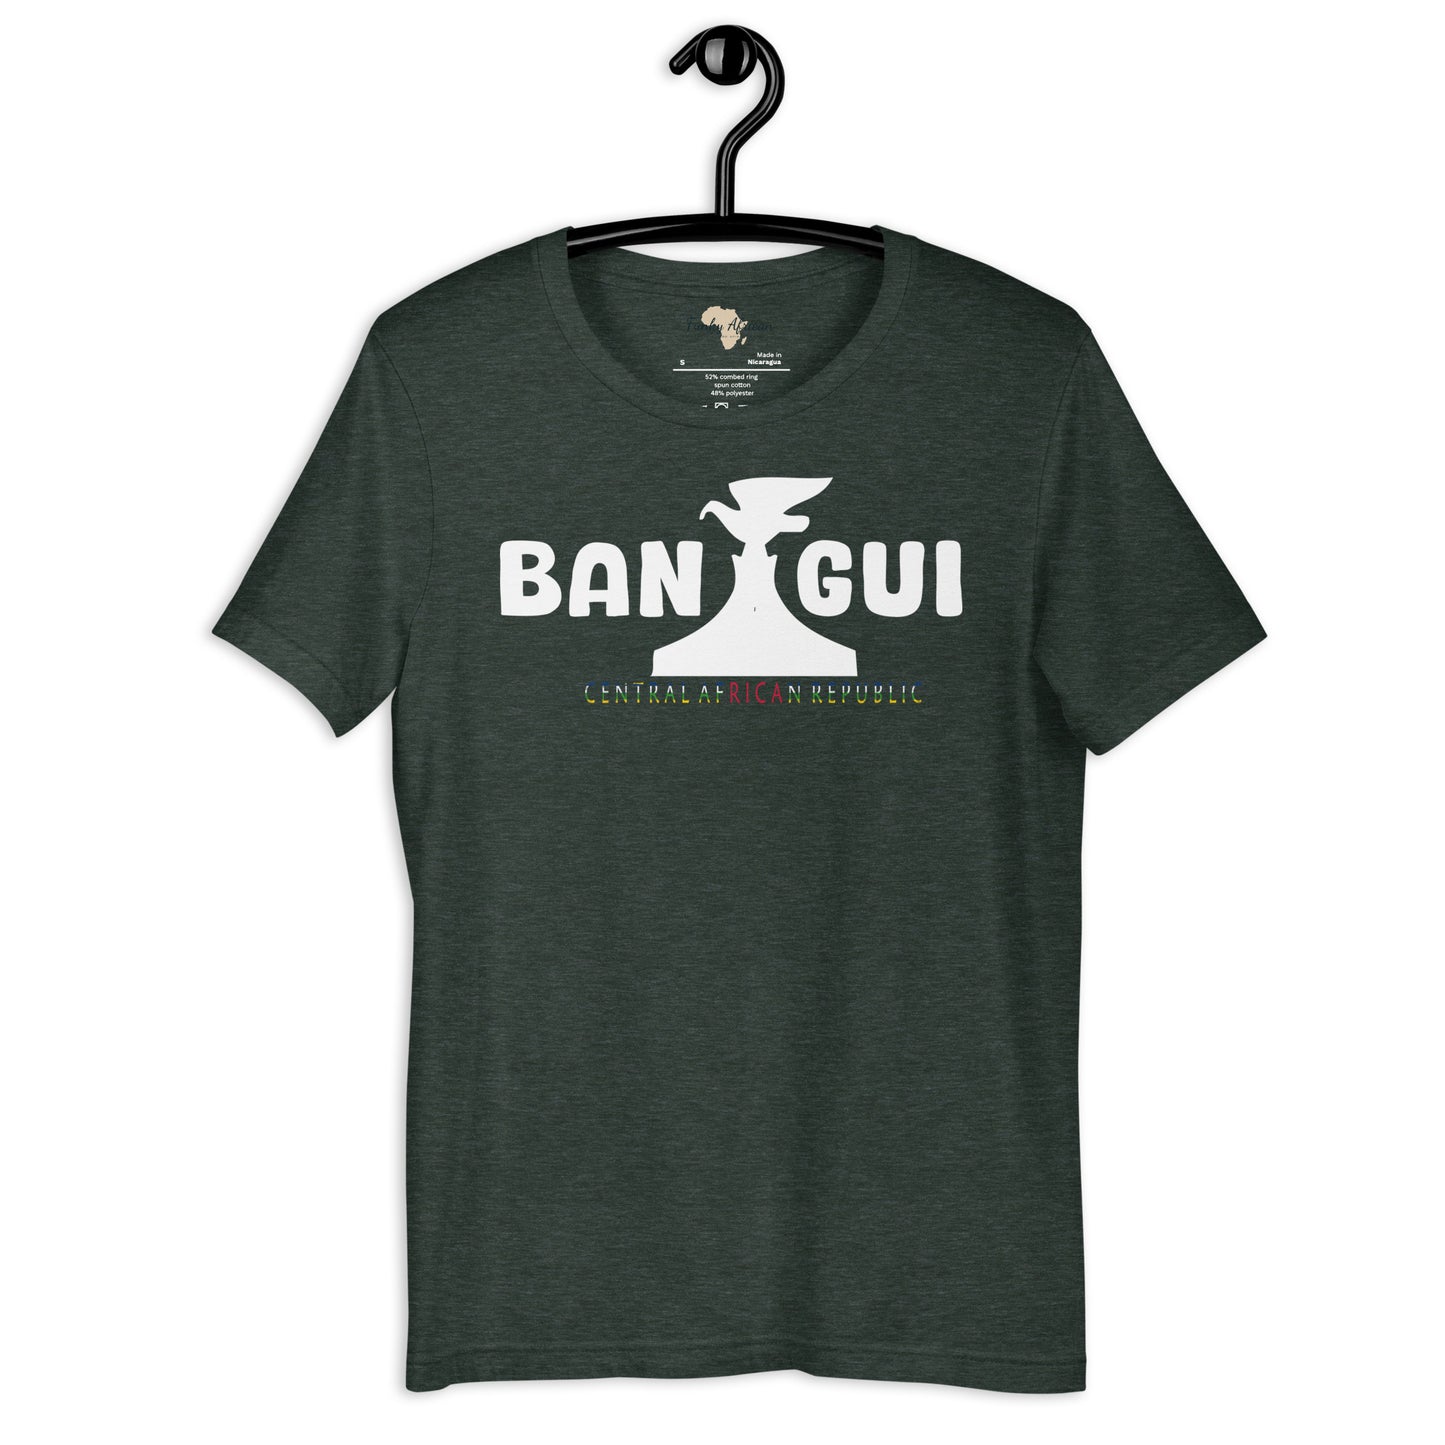 Central African Republic capital unisex tee